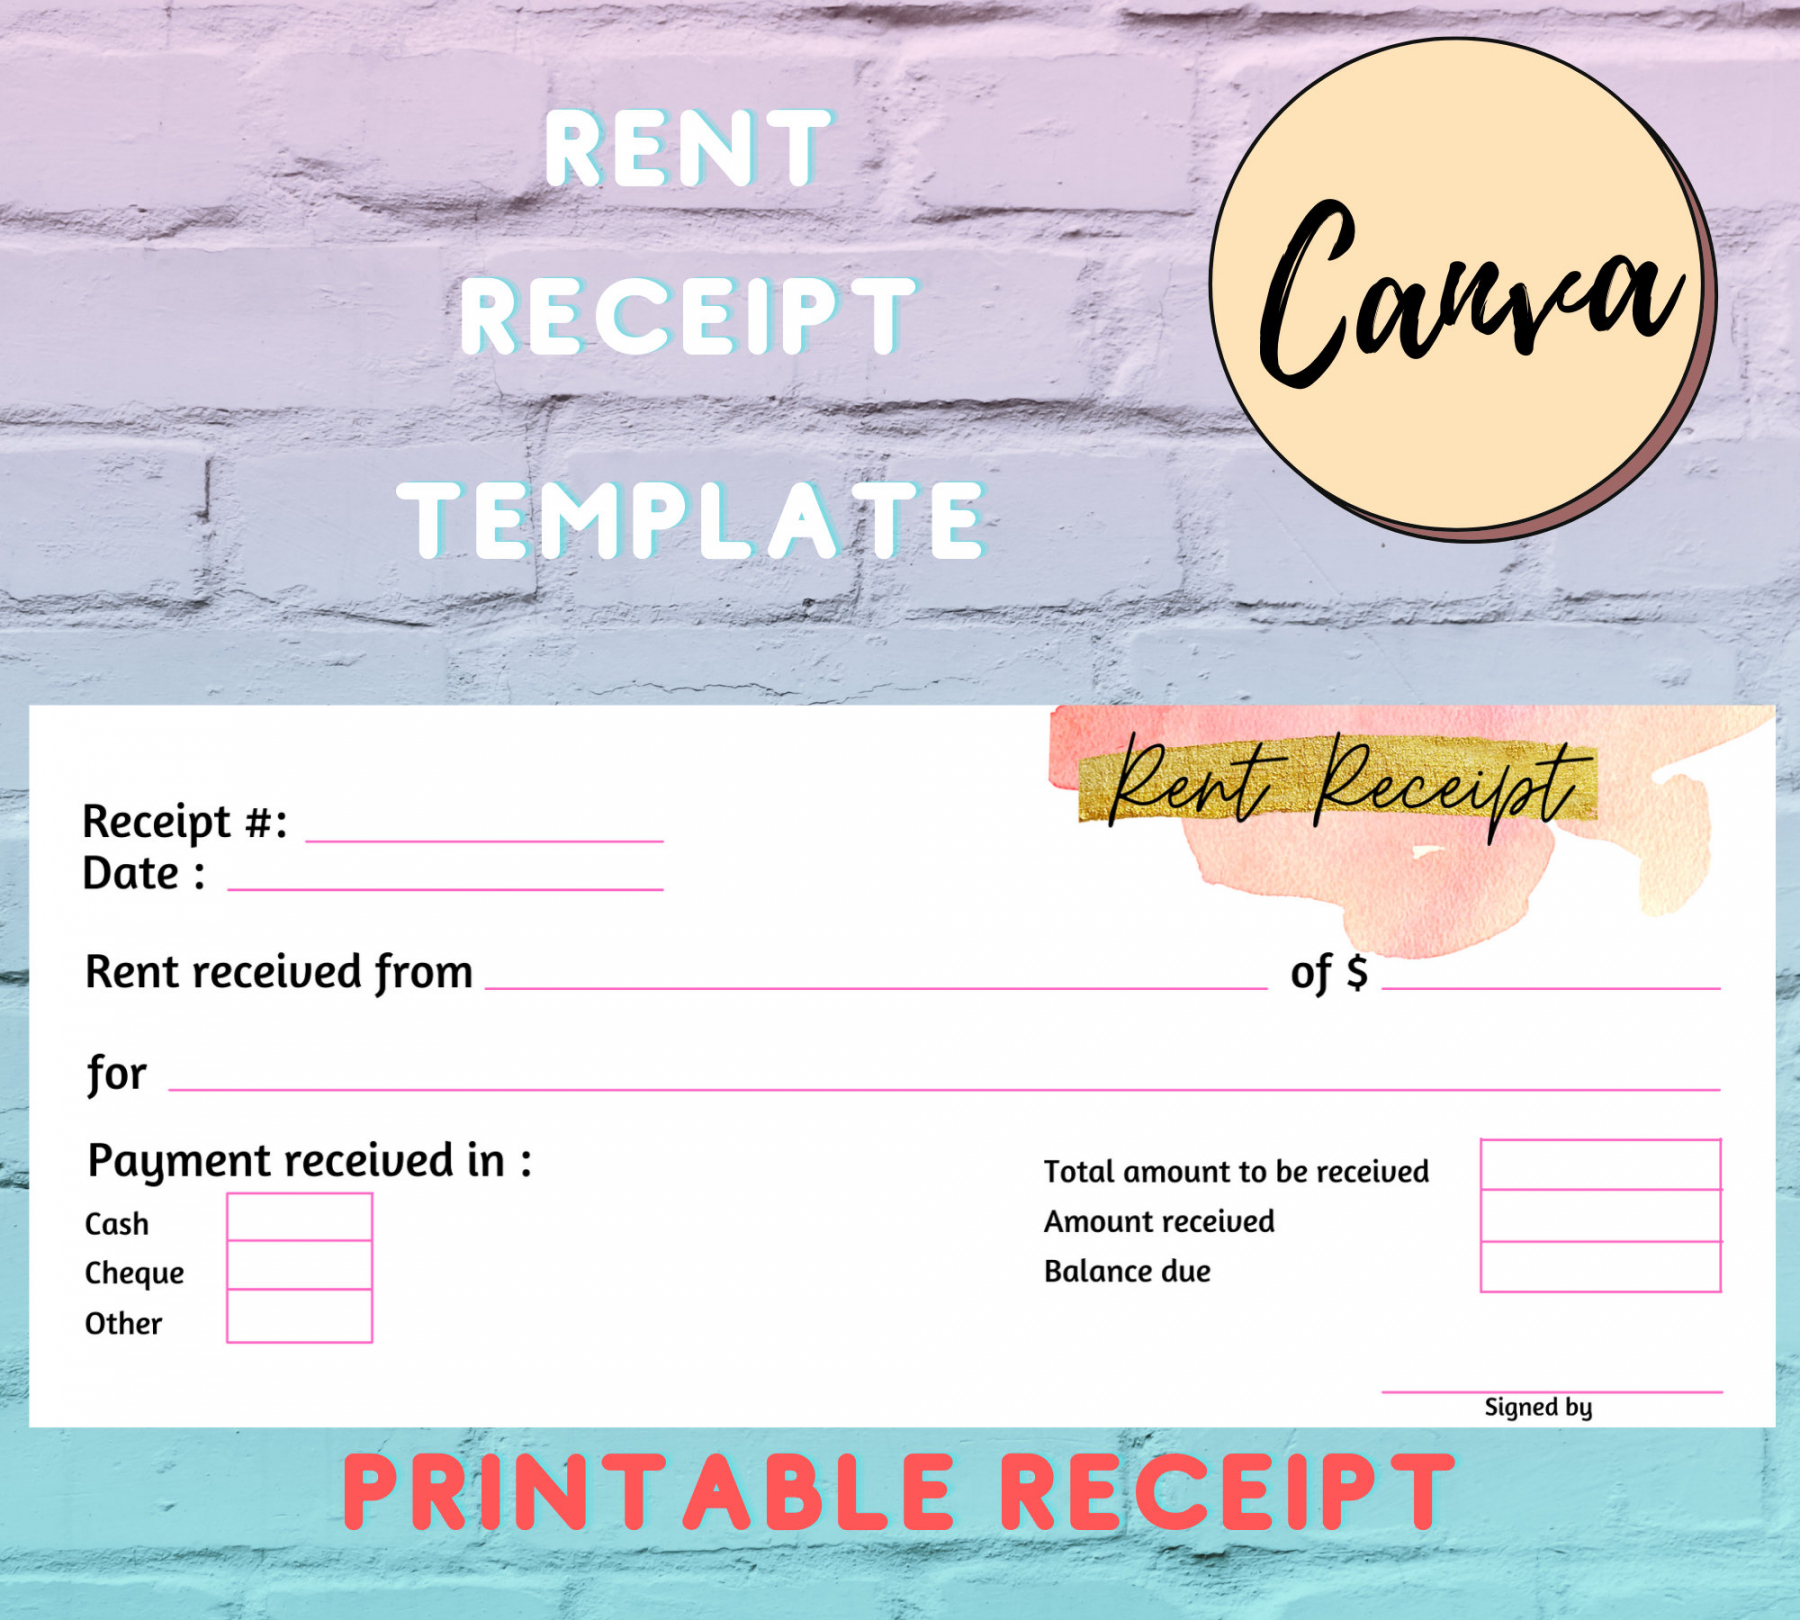 Free Printable Rent Receipt - Printable - Rent Receipt Template Printable & Editable in Canva Small - Etsy